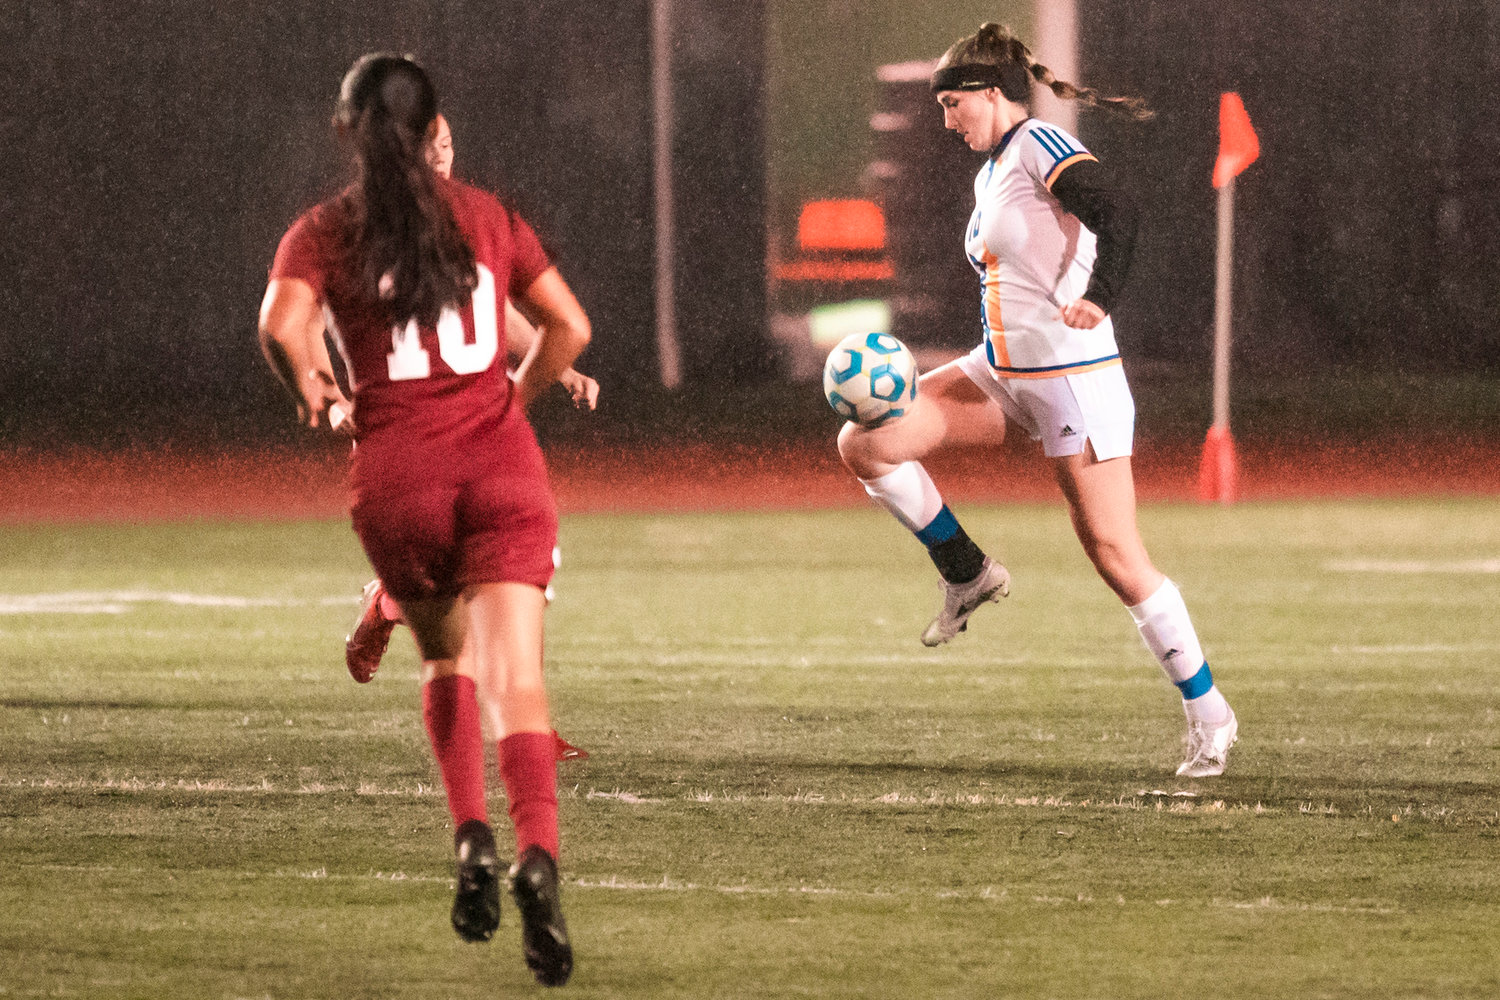 Centralia’s Erin Stanfill (16) takes control of the ball Wednesday night during a match against Pierce College in Centralia.